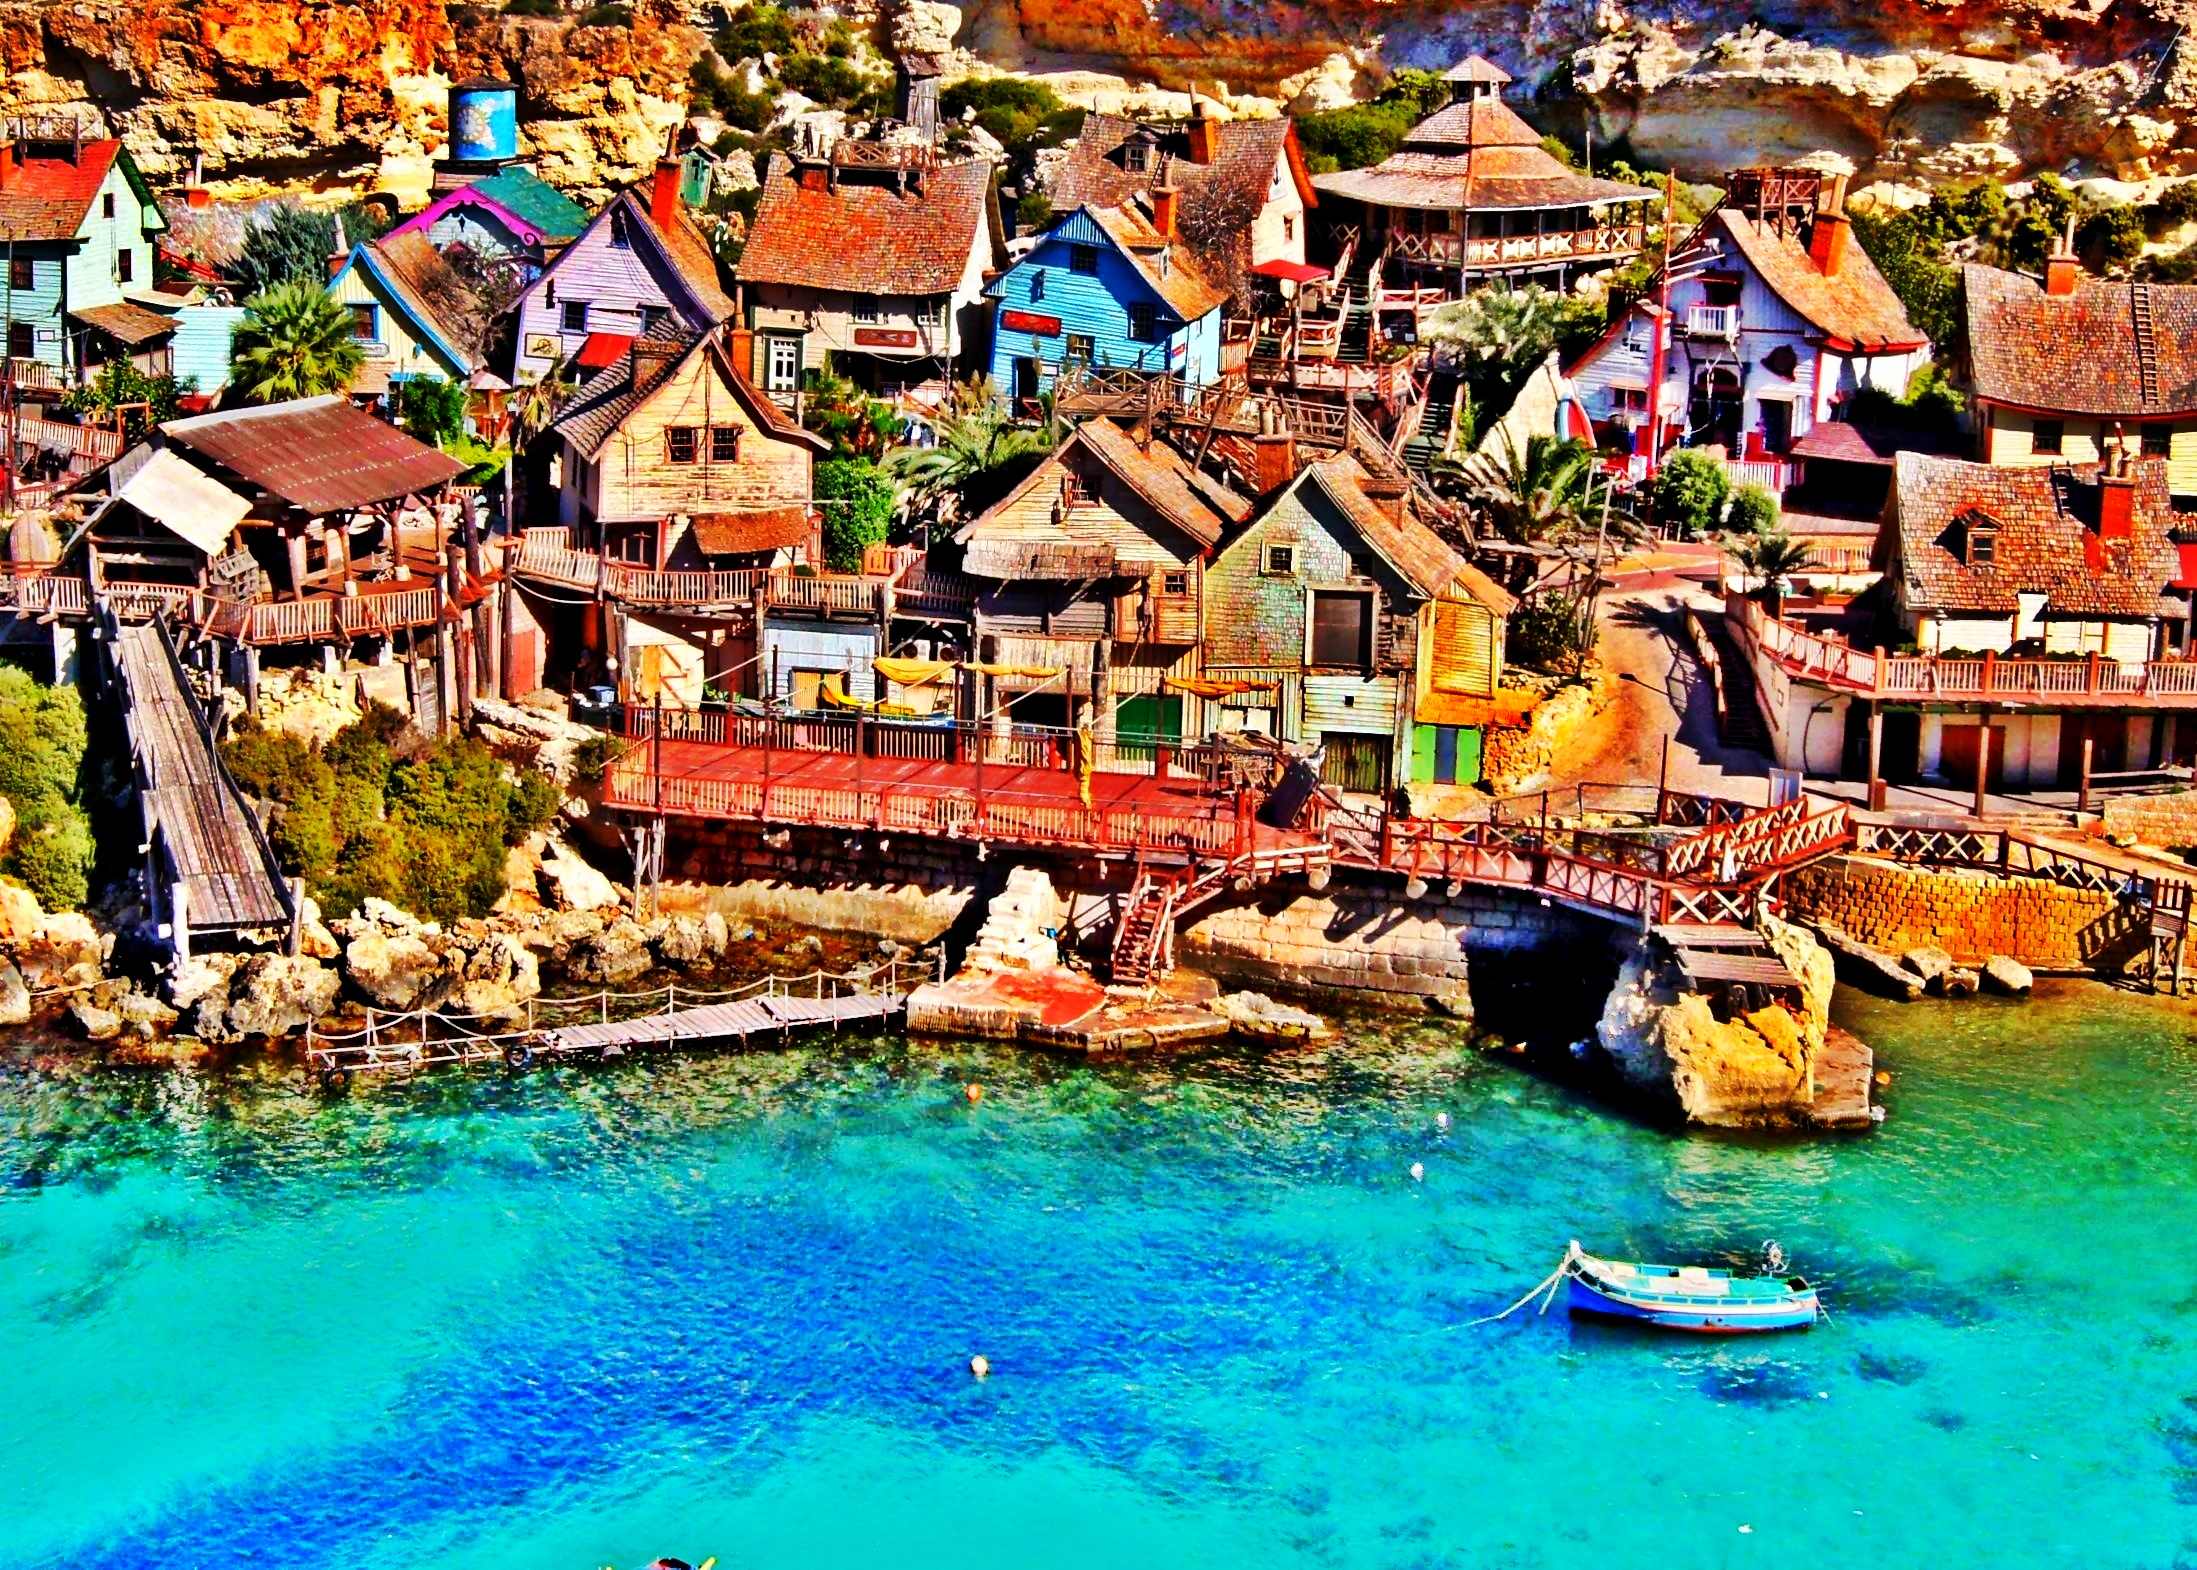 Amazing Popeye Village Pictures & Backgrounds